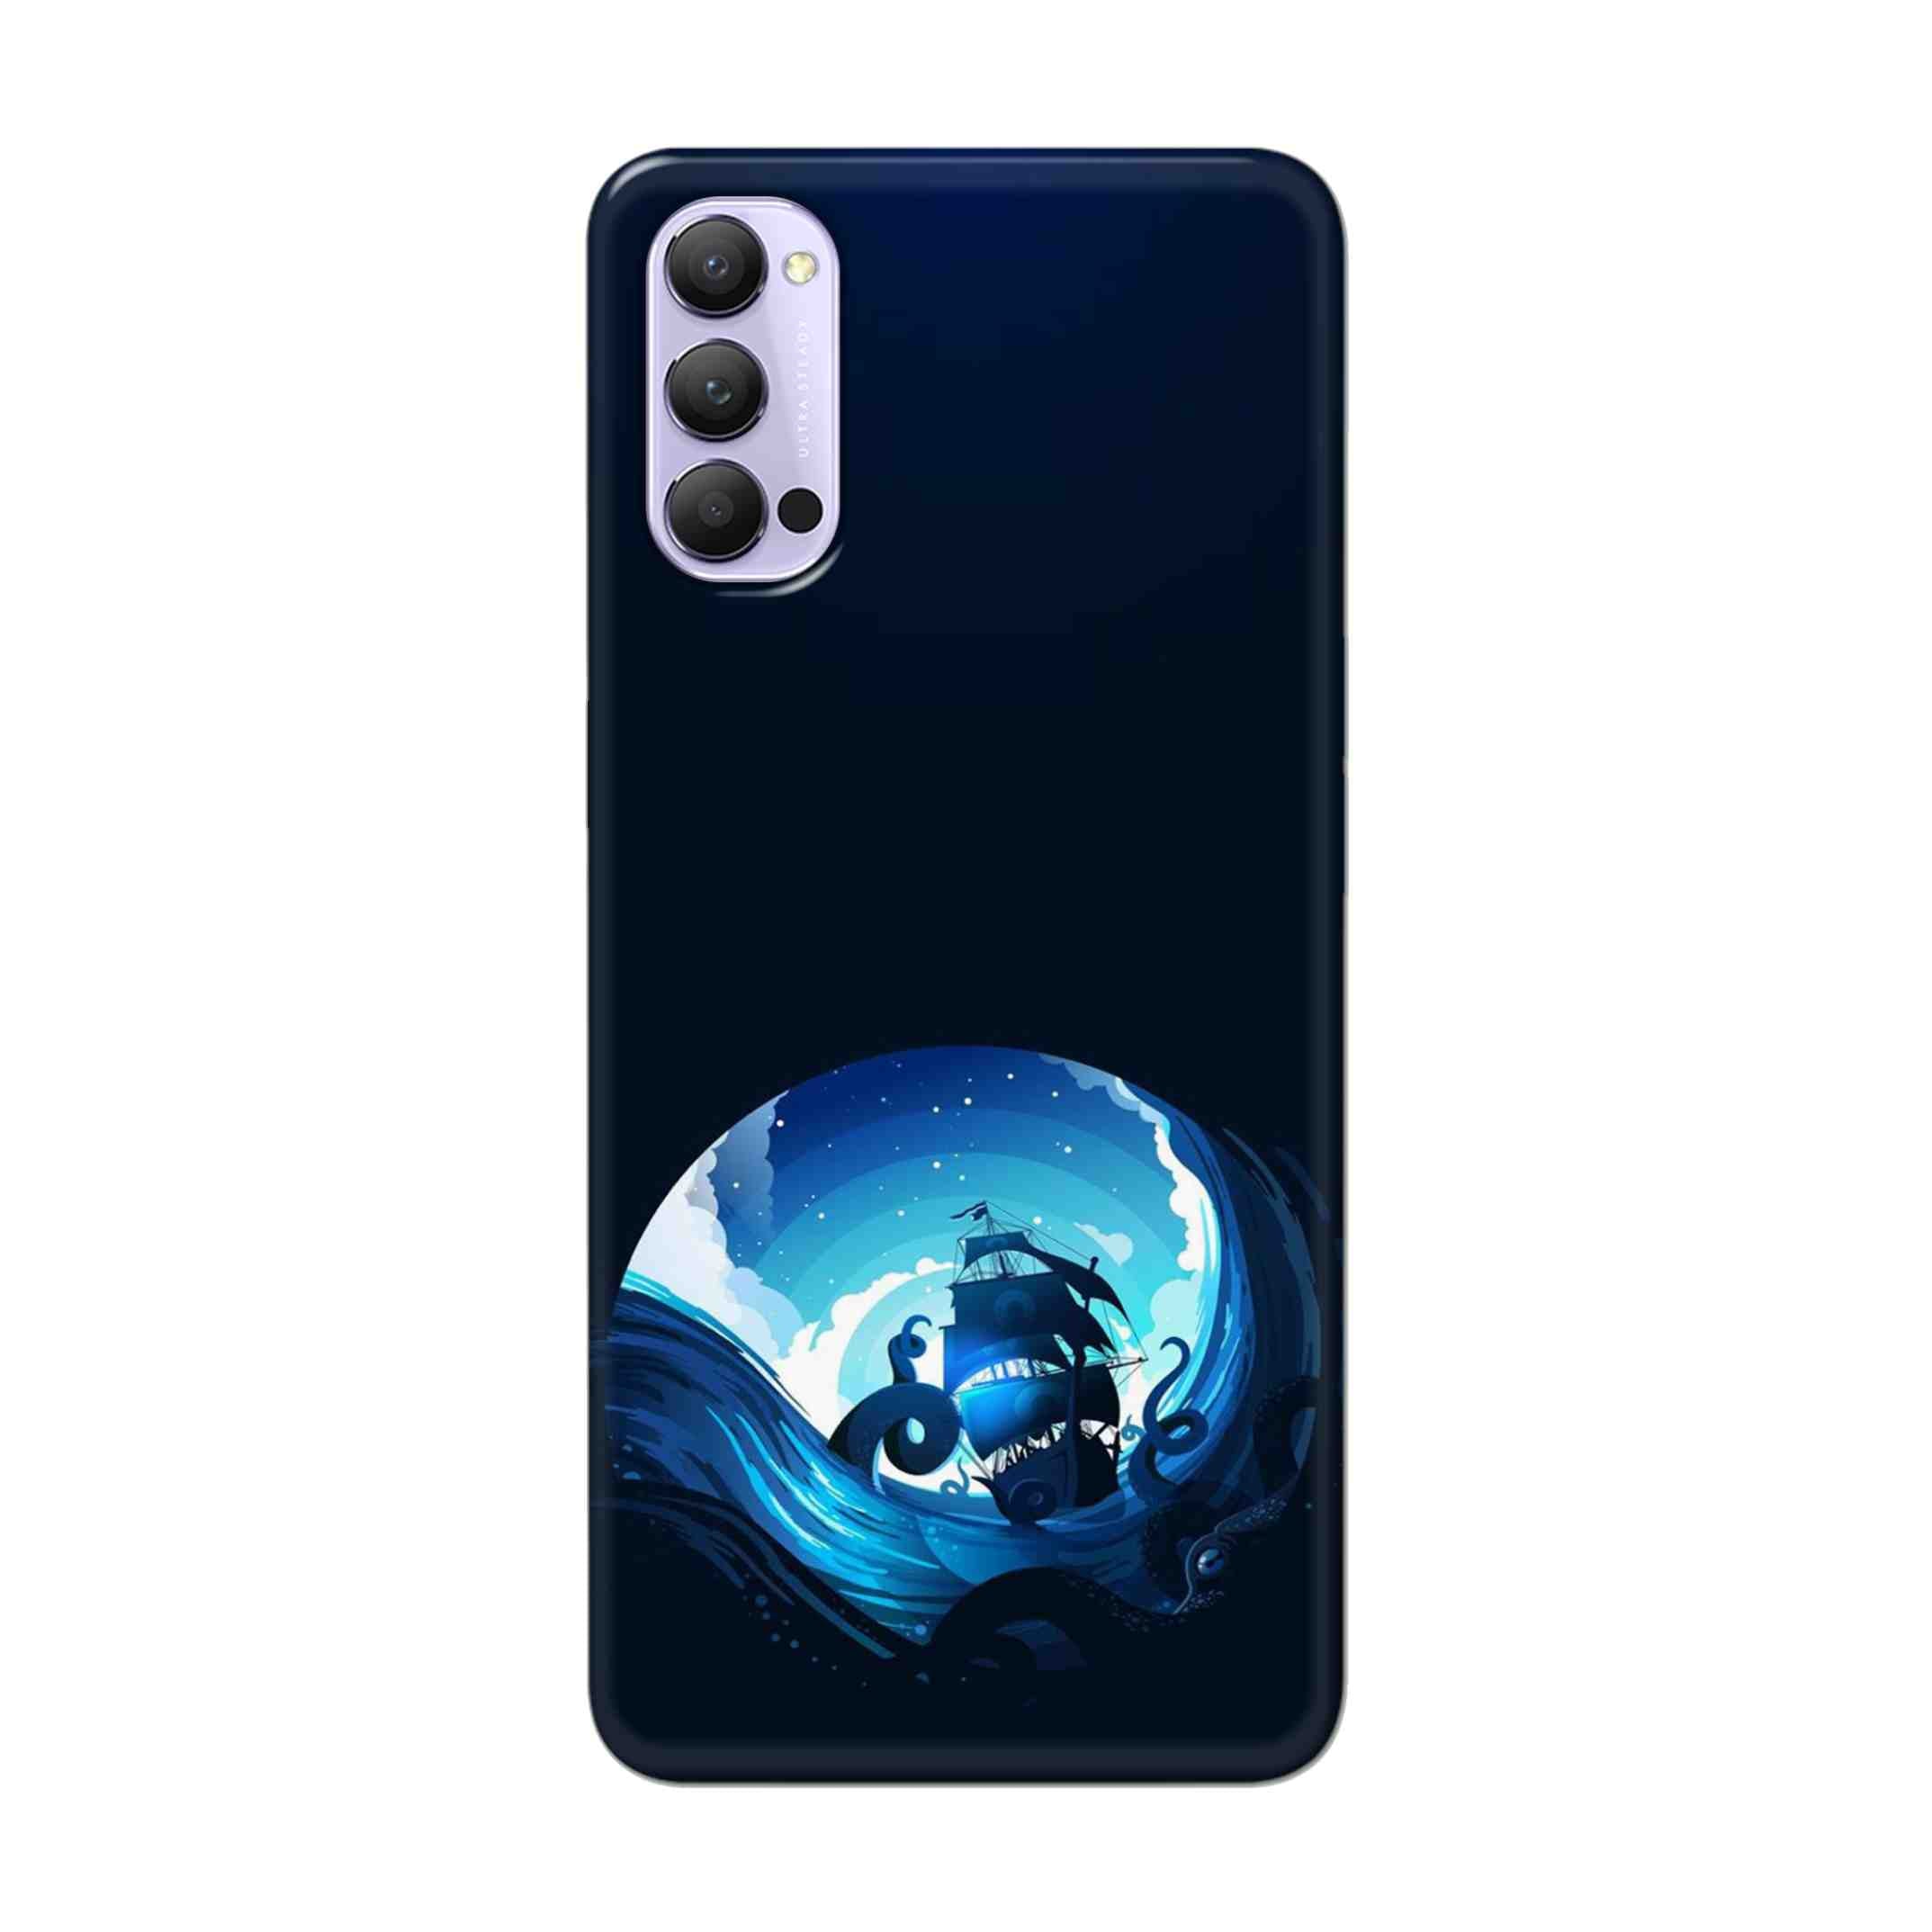 Buy Blue Sea Ship Hard Back Mobile Phone Case Cover For Oppo Reno 4 Pro Online